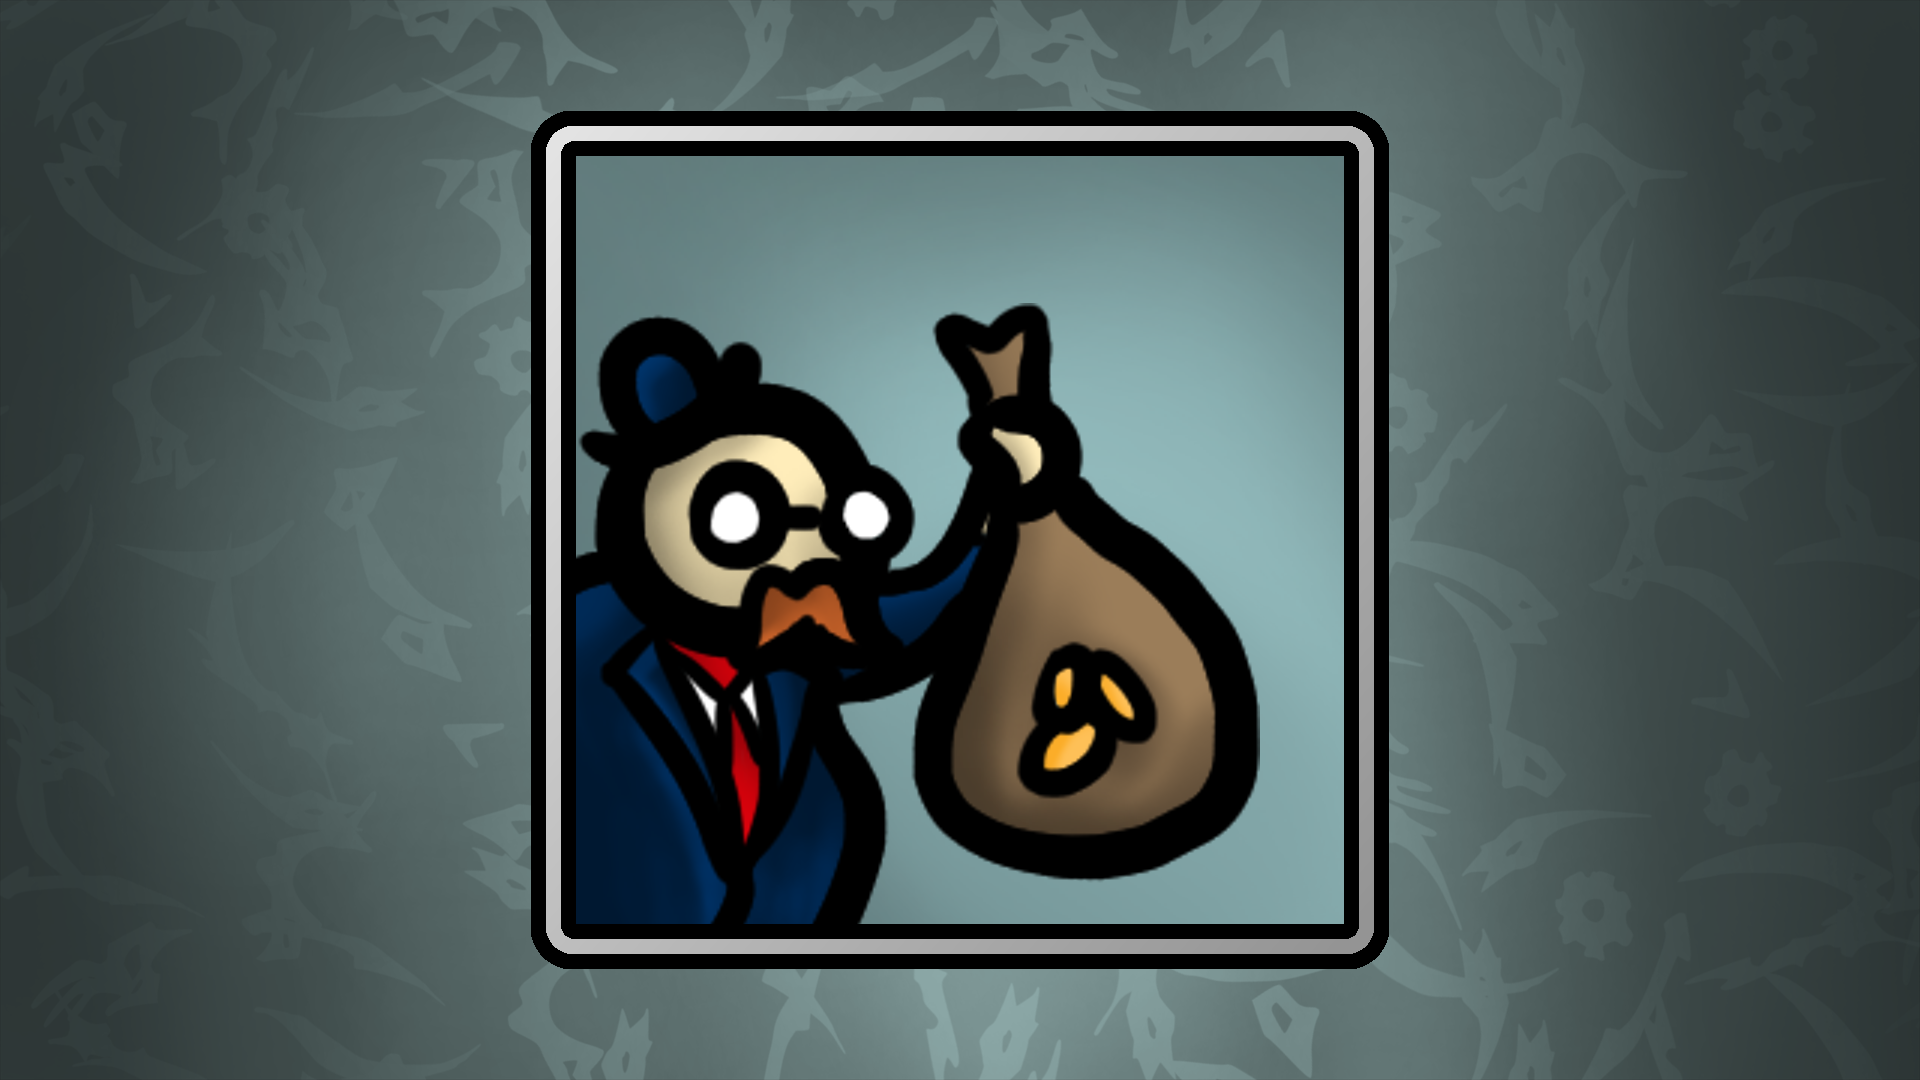 Icon for Big Spender